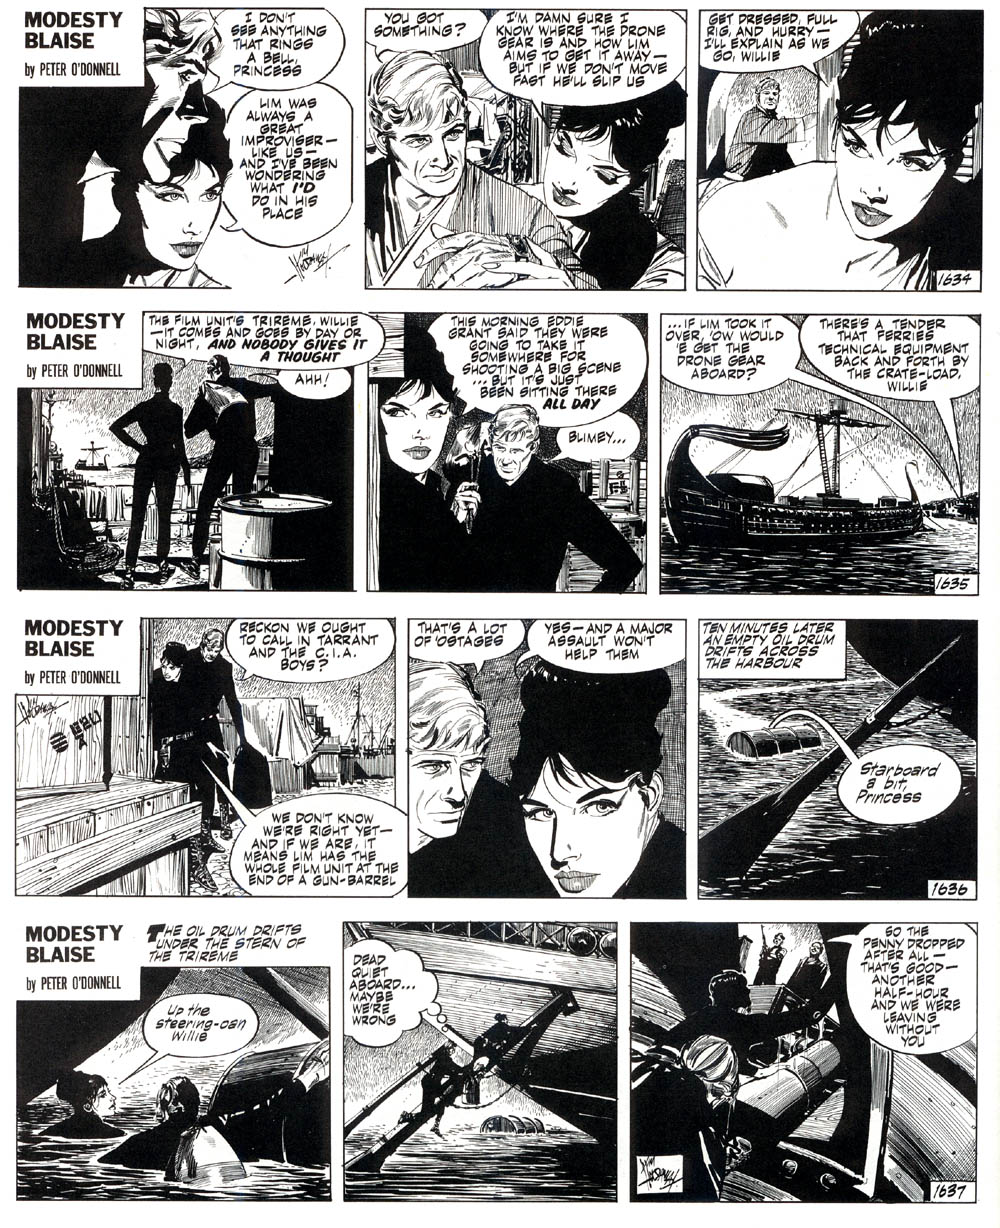 Hairy Green Eyeball Complete Modesty Blaise Comic Strip Sequence